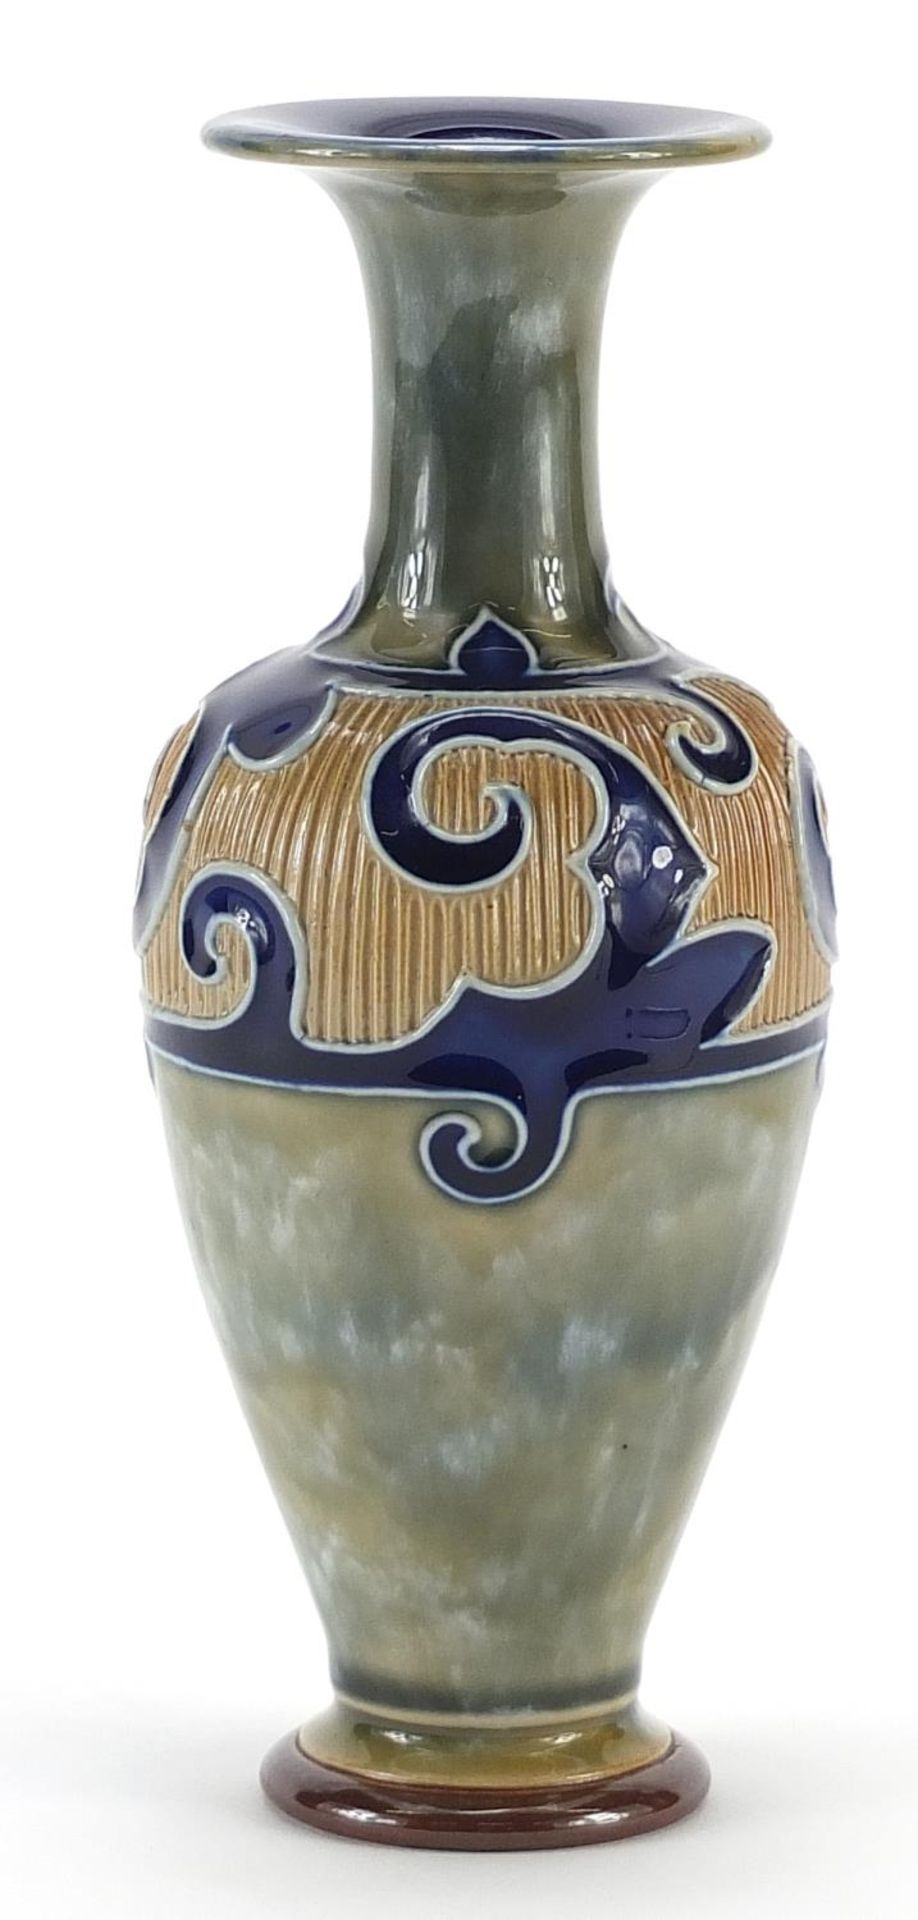 Frank Butler for Royal Doulton, Art Nouveau stoneware vase hand painted with stylised flowers, 17.